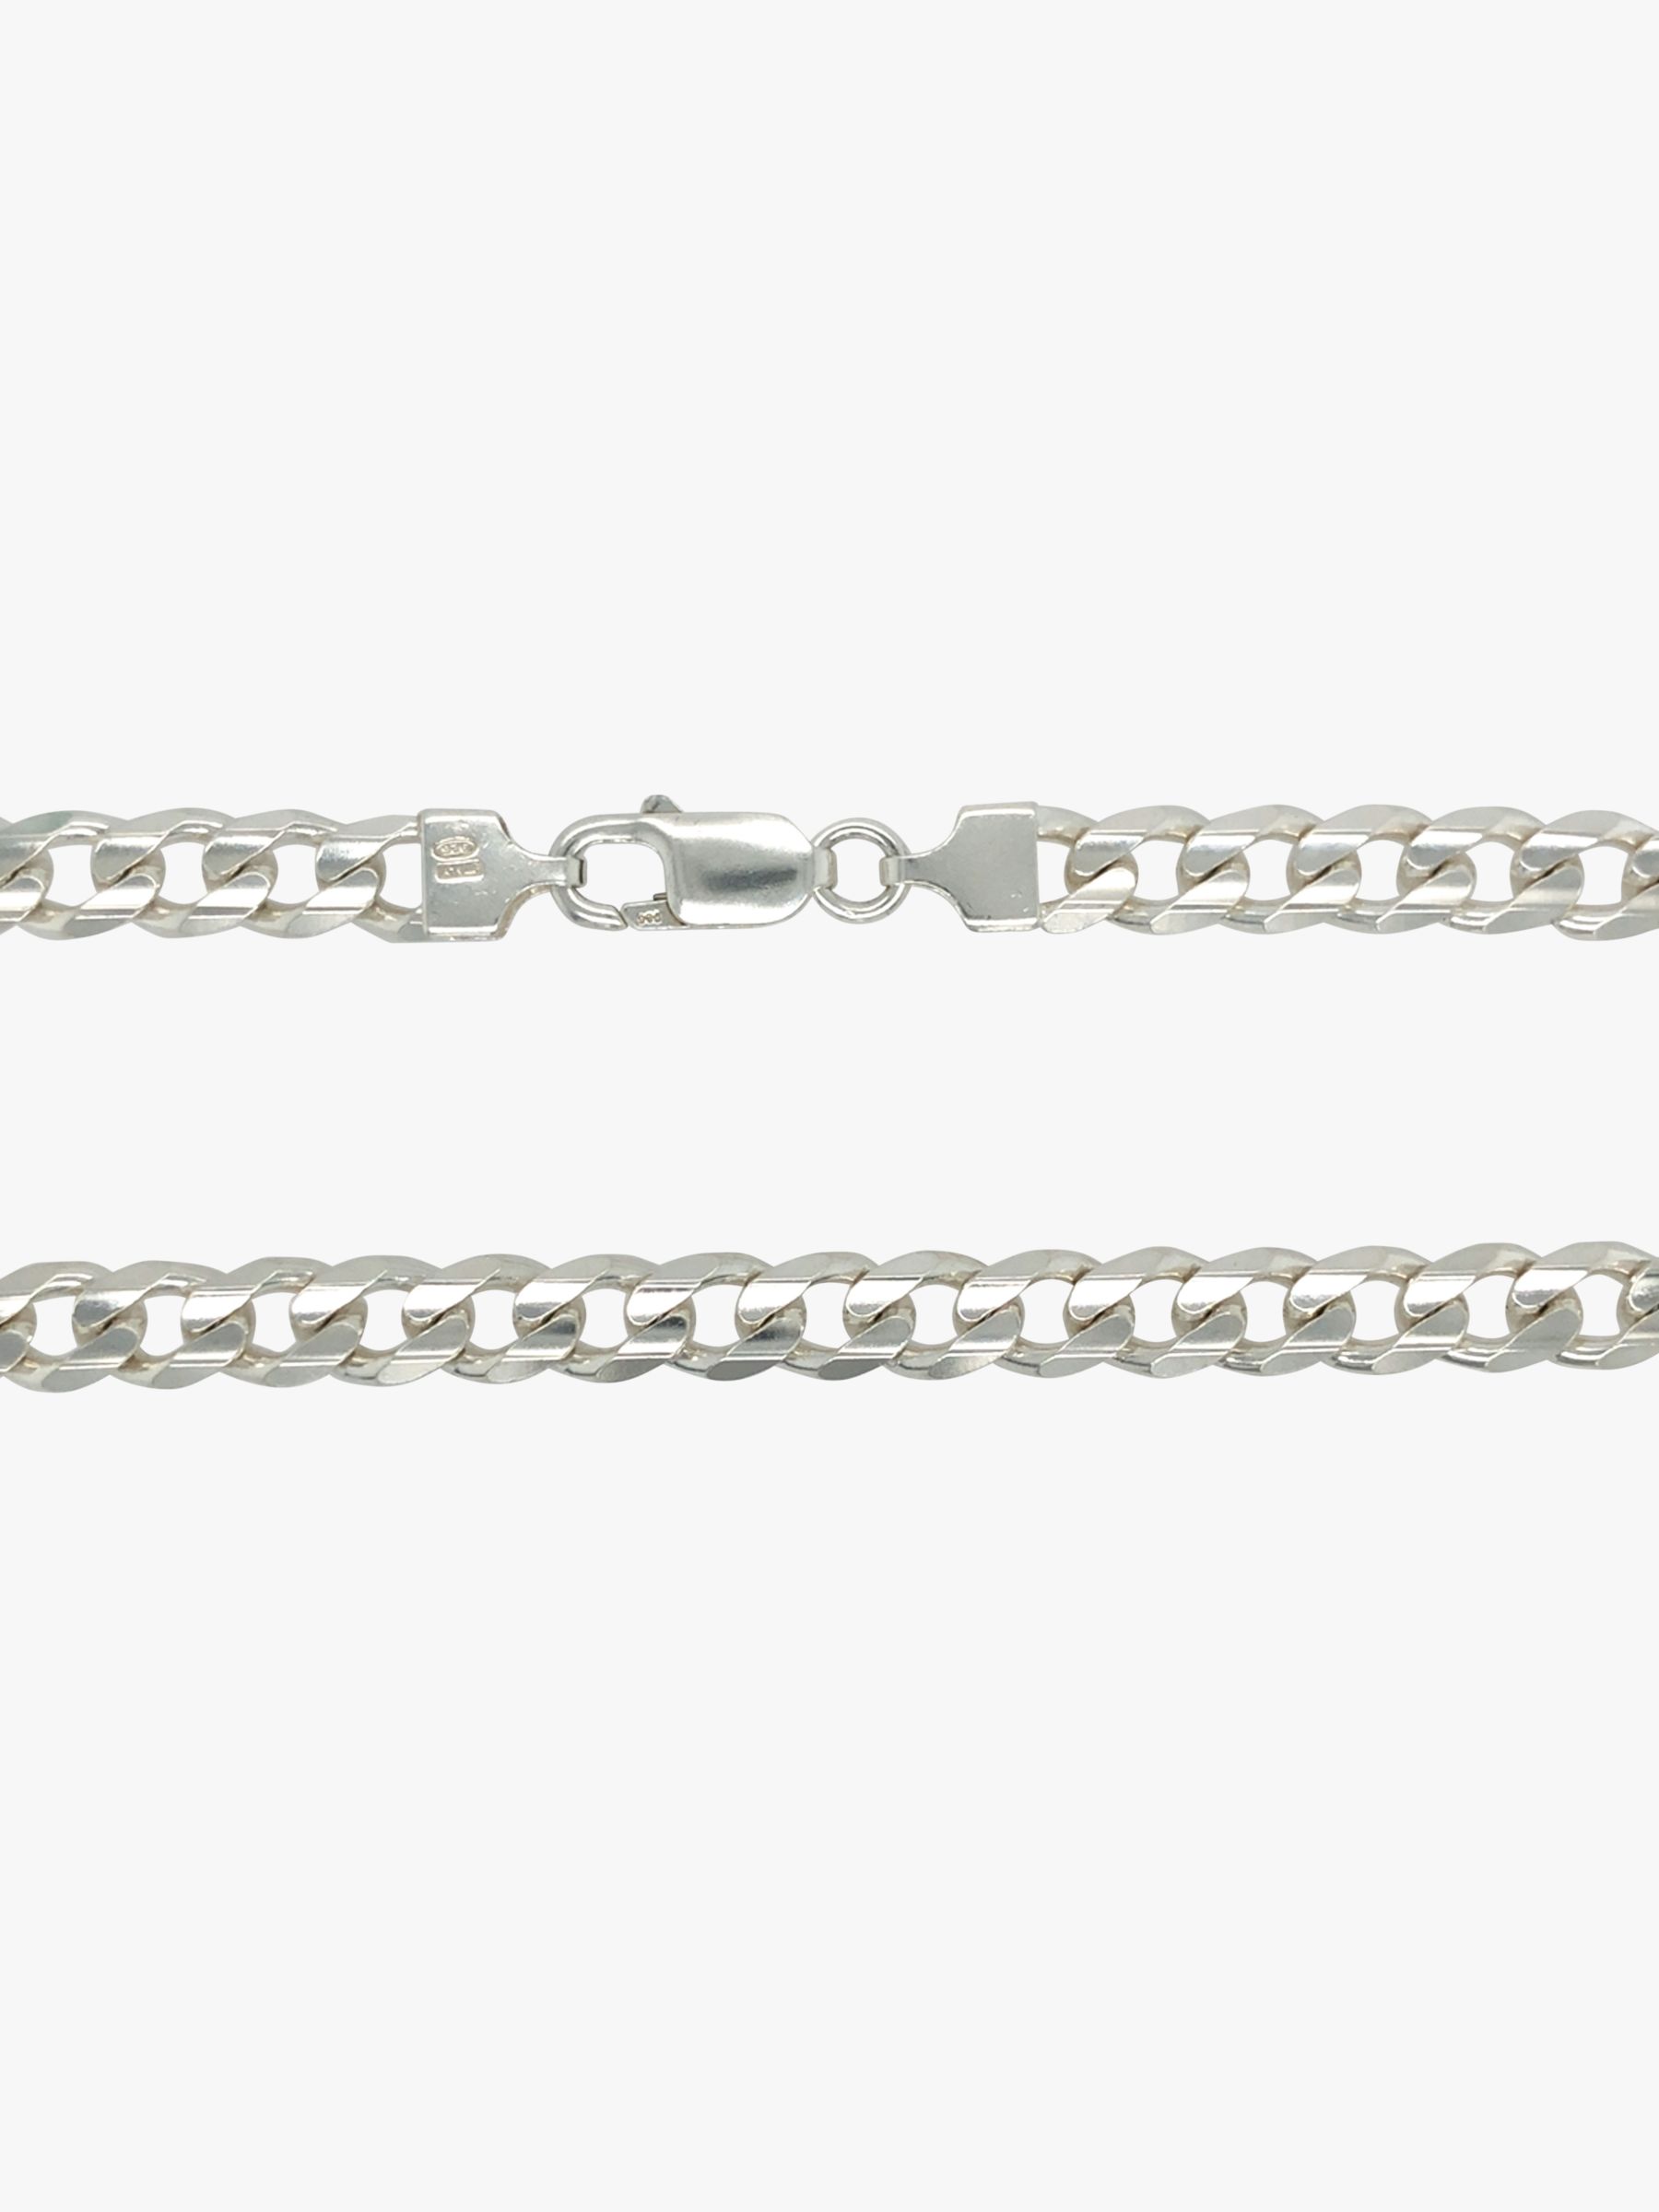 Buy Vintage Fine Jewellery Second Hand Curb Link Chain Necklace, Dated Circa 1980s Online at johnlewis.com